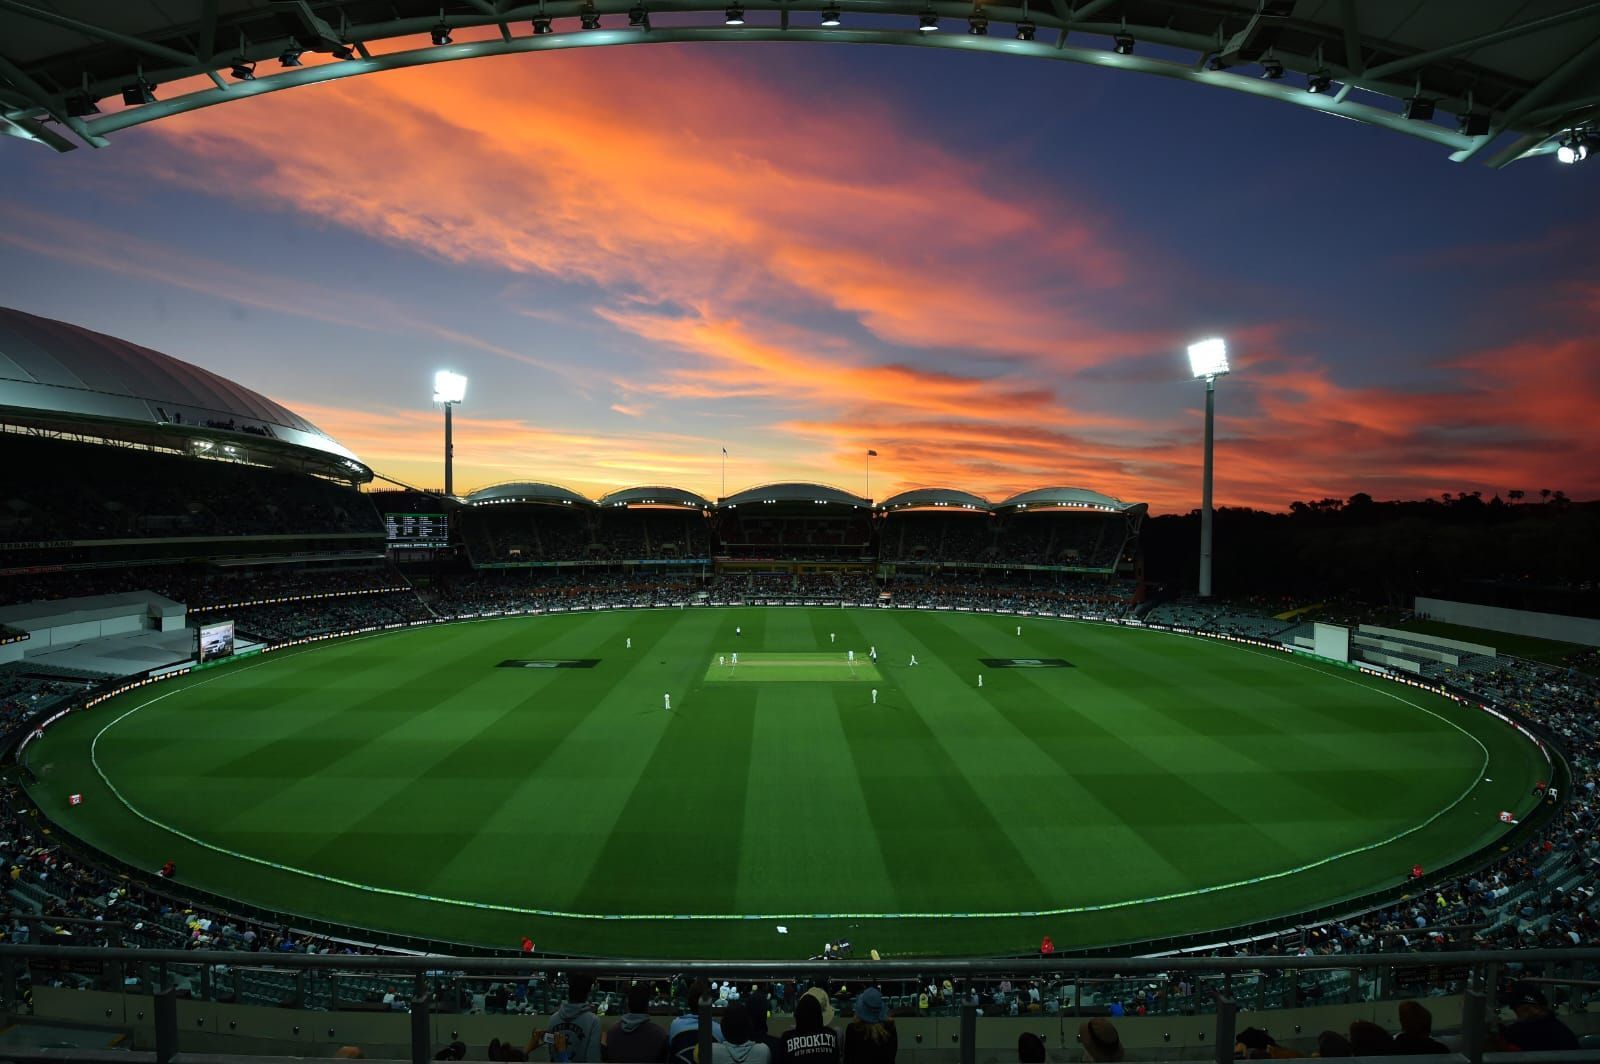 The semi-final between India and England will be played at the Adelaide Oval. [Pic Credit - ICC]